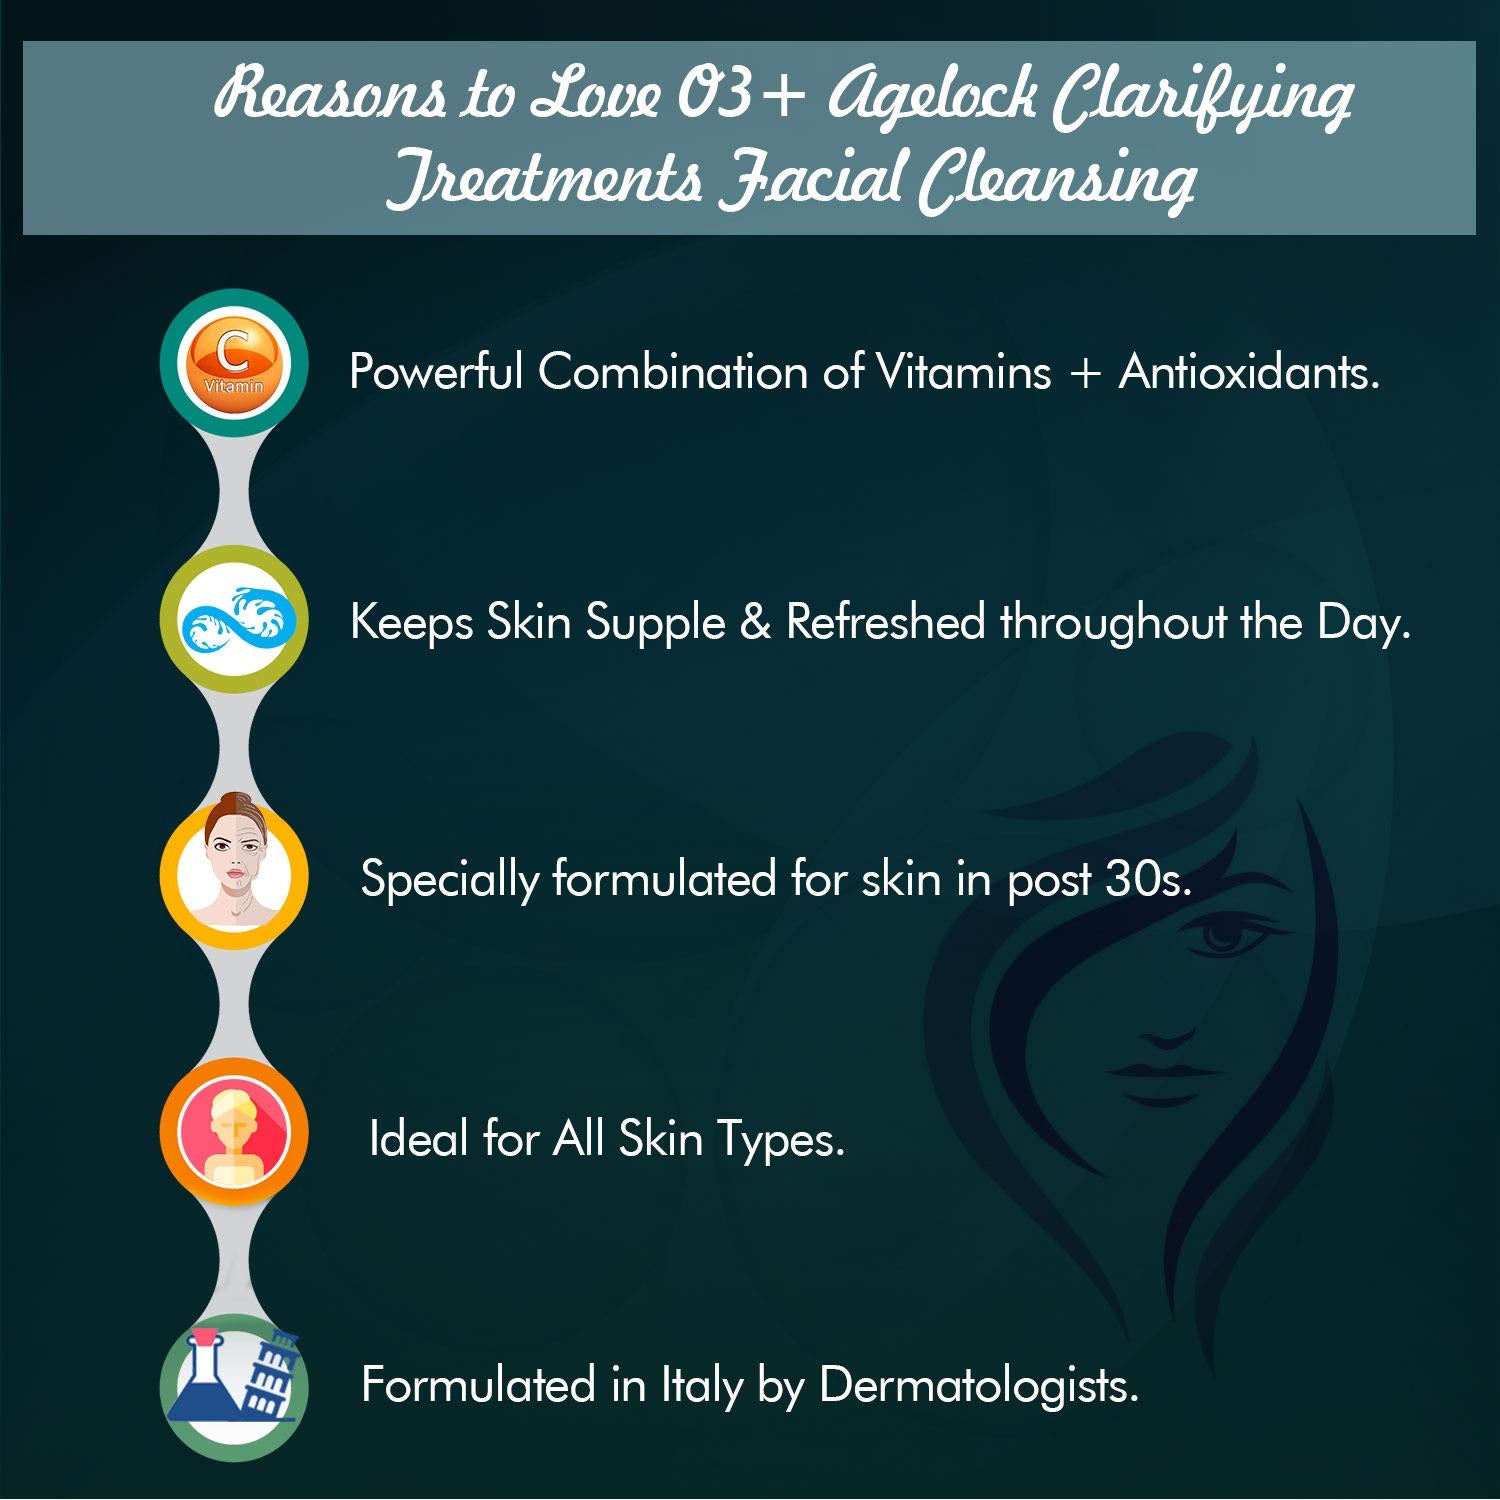 O3+ Agelock Clarifying Treatments Facial Cleansing Gel, 75 g  from O3+